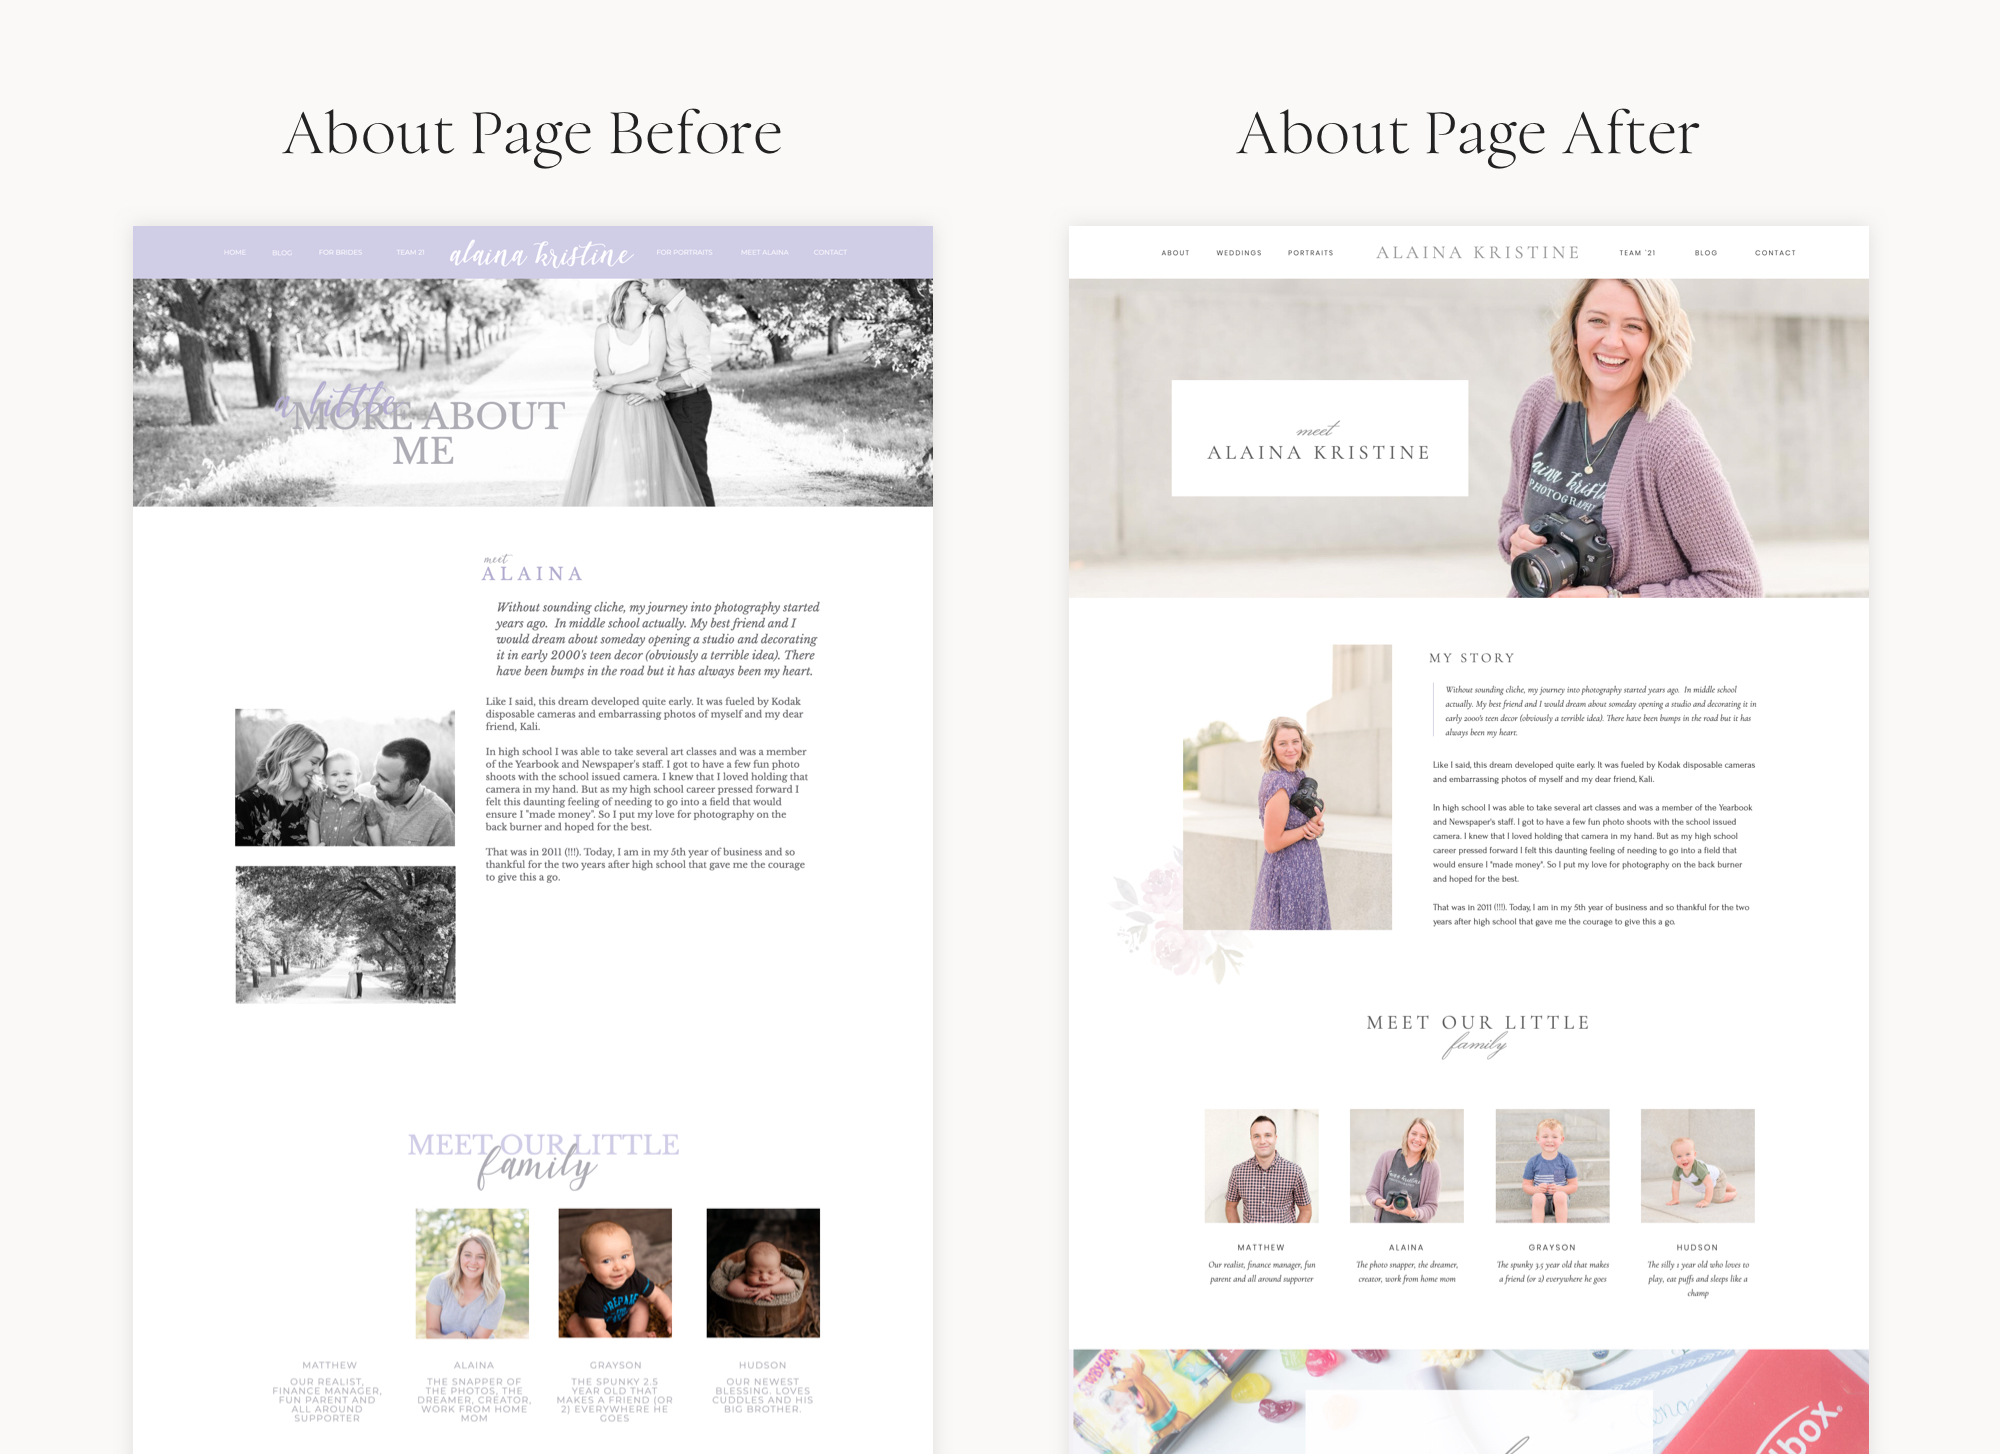 About Page before and after